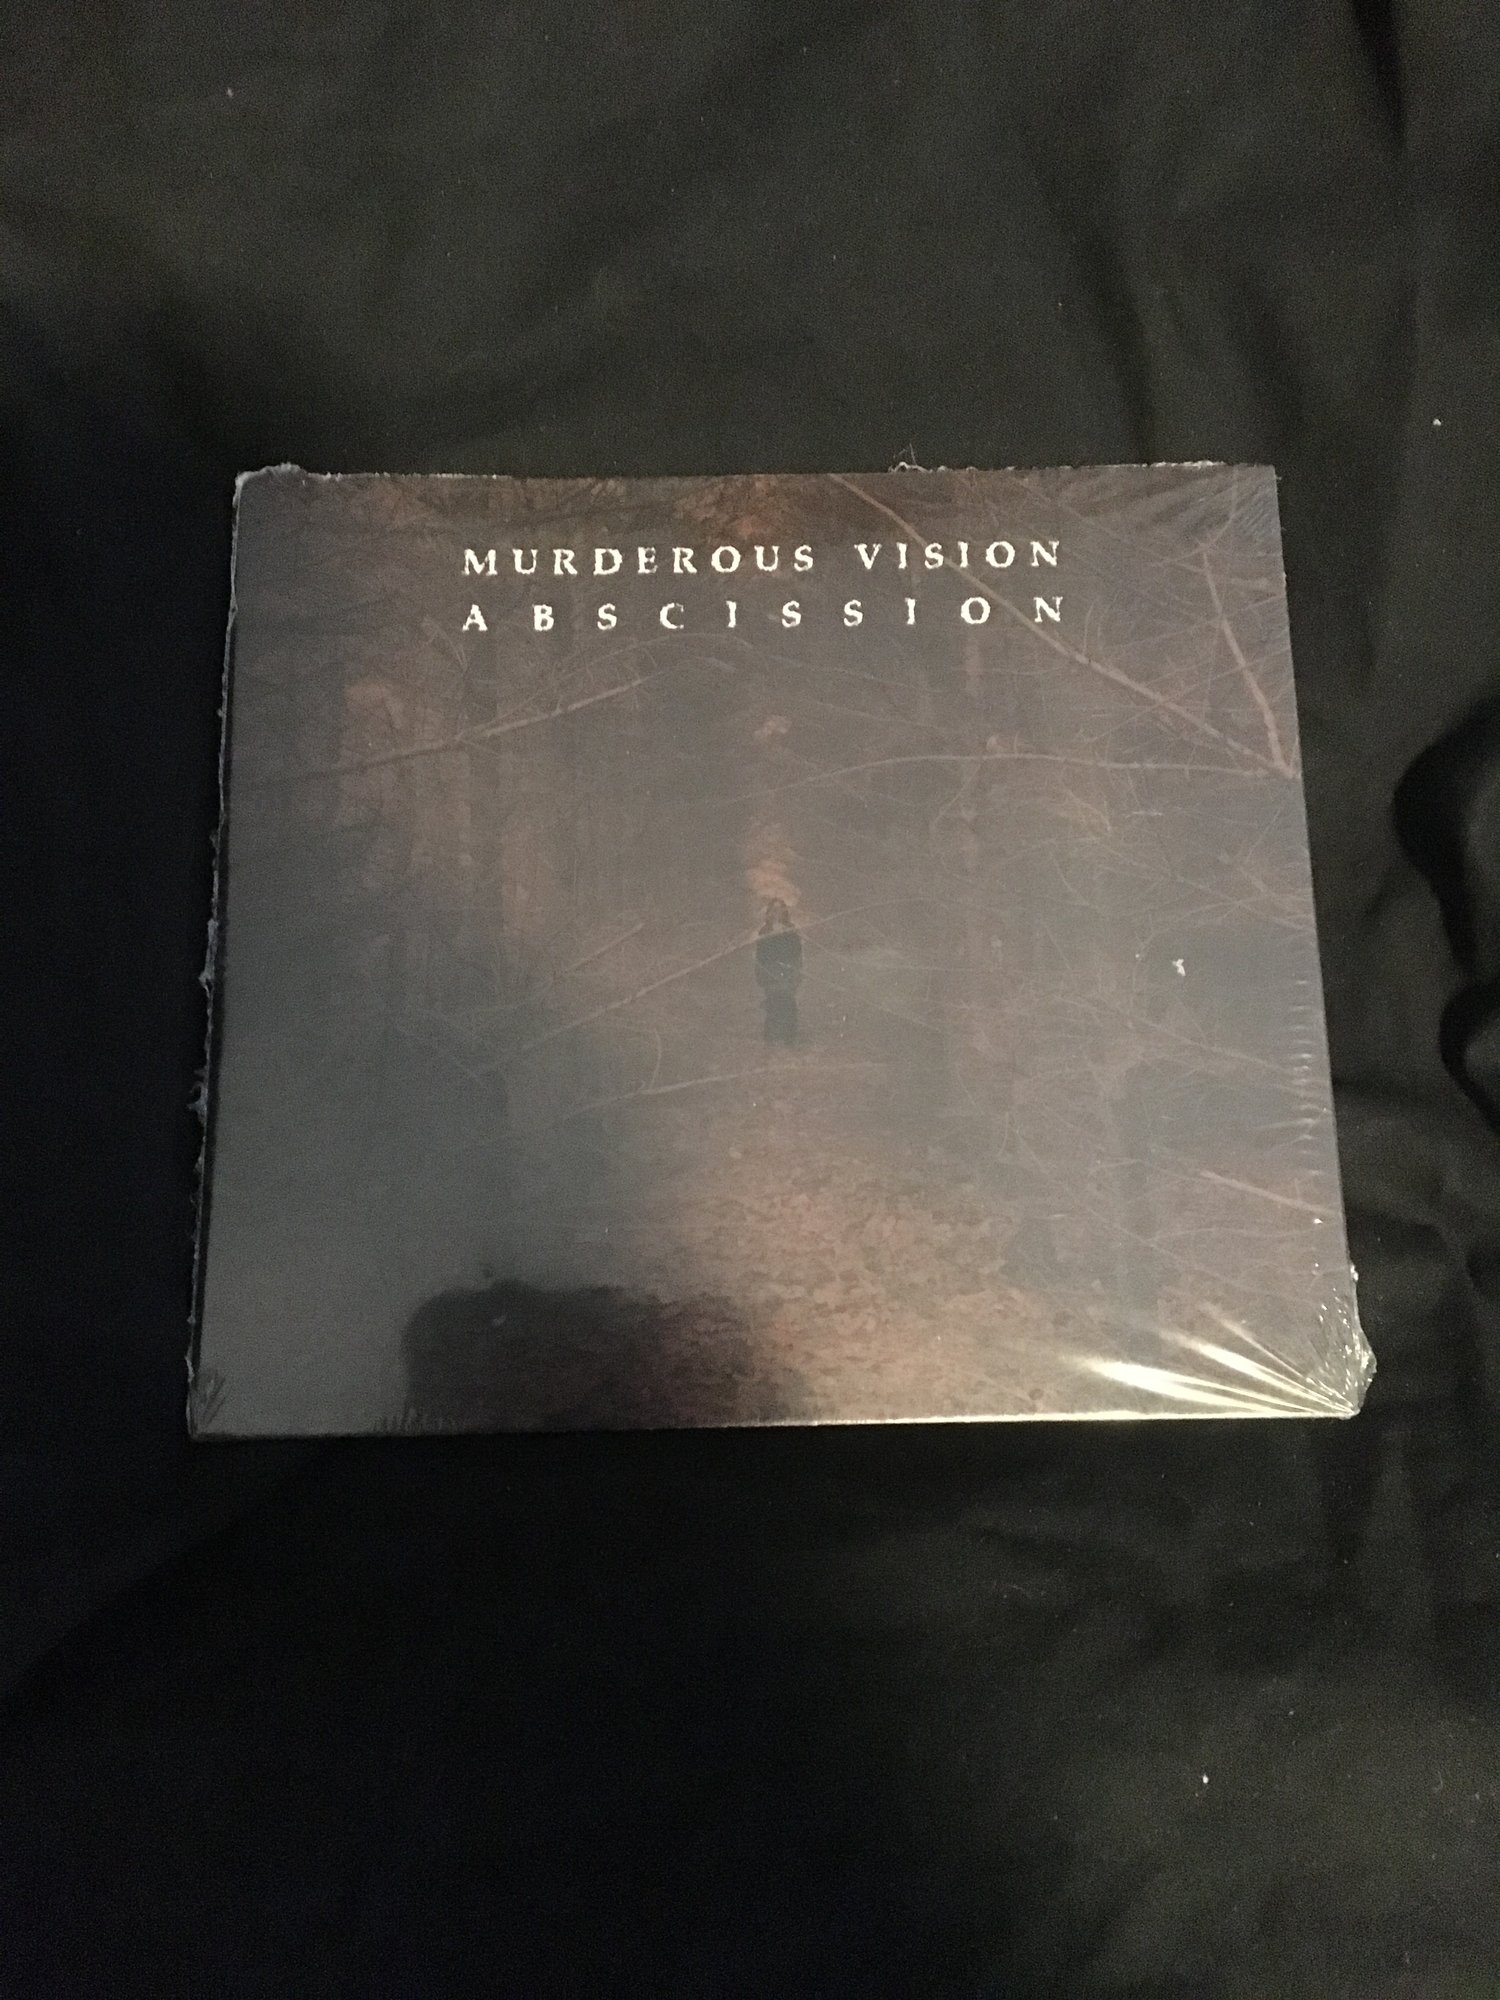 Murderous Vision - Abscission CD (Chthonic Streams)